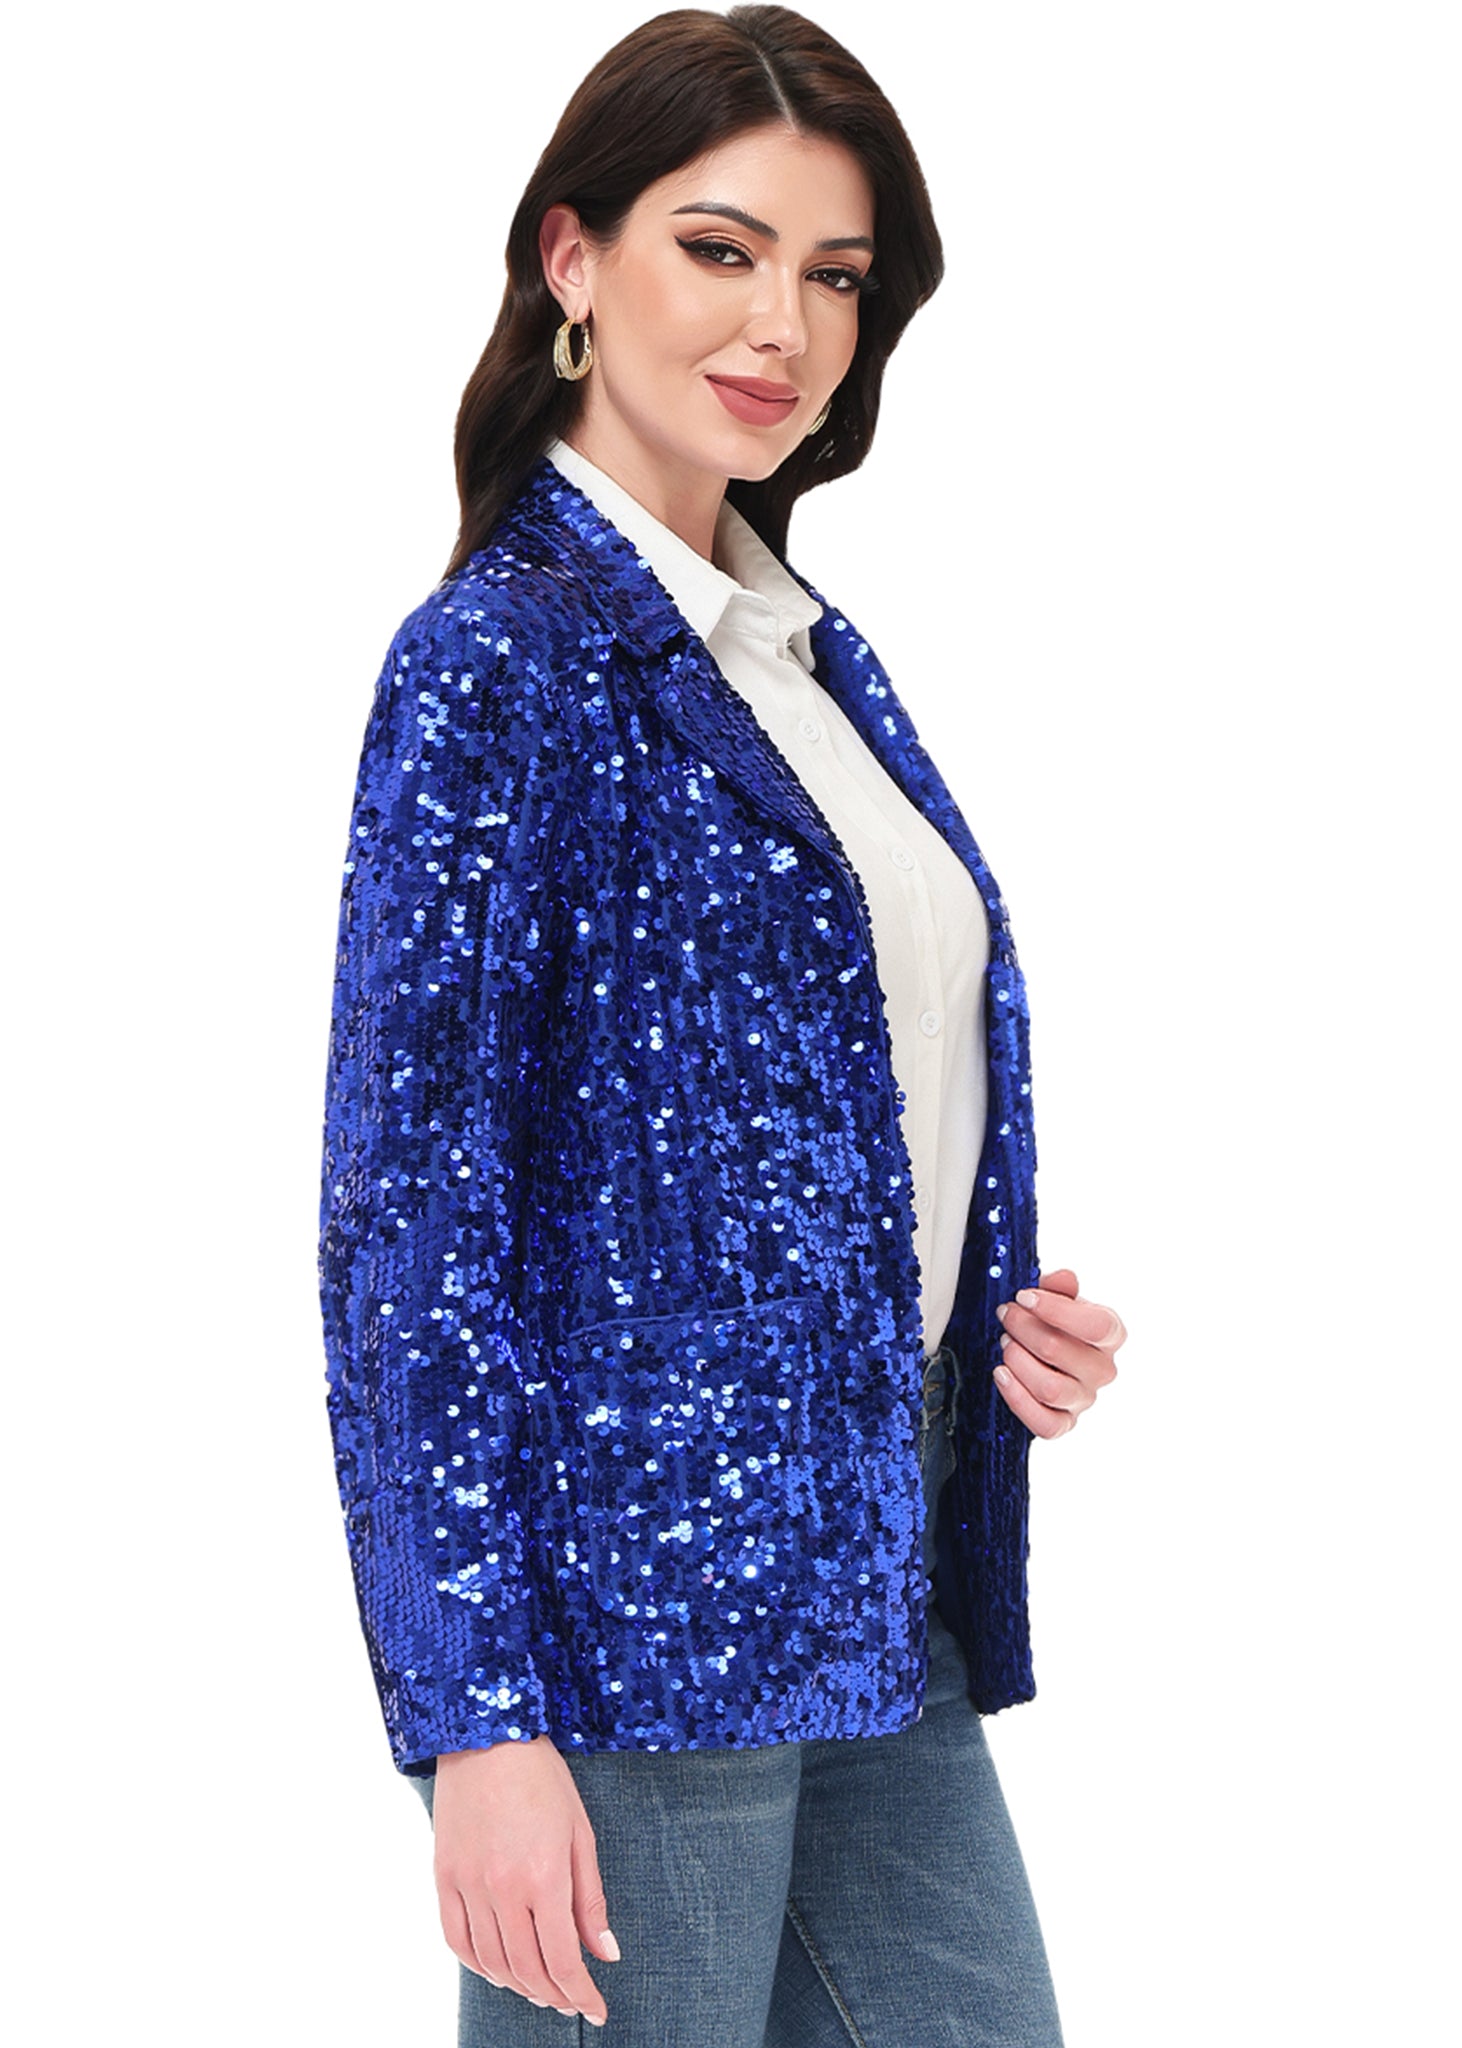 jsaierl Sequin Jacket for Women Cropped Cardigan Puff Sleeve Shiny Sparkly  Shrug Clubwear Glitter Open Front Jackets - Walmart.com